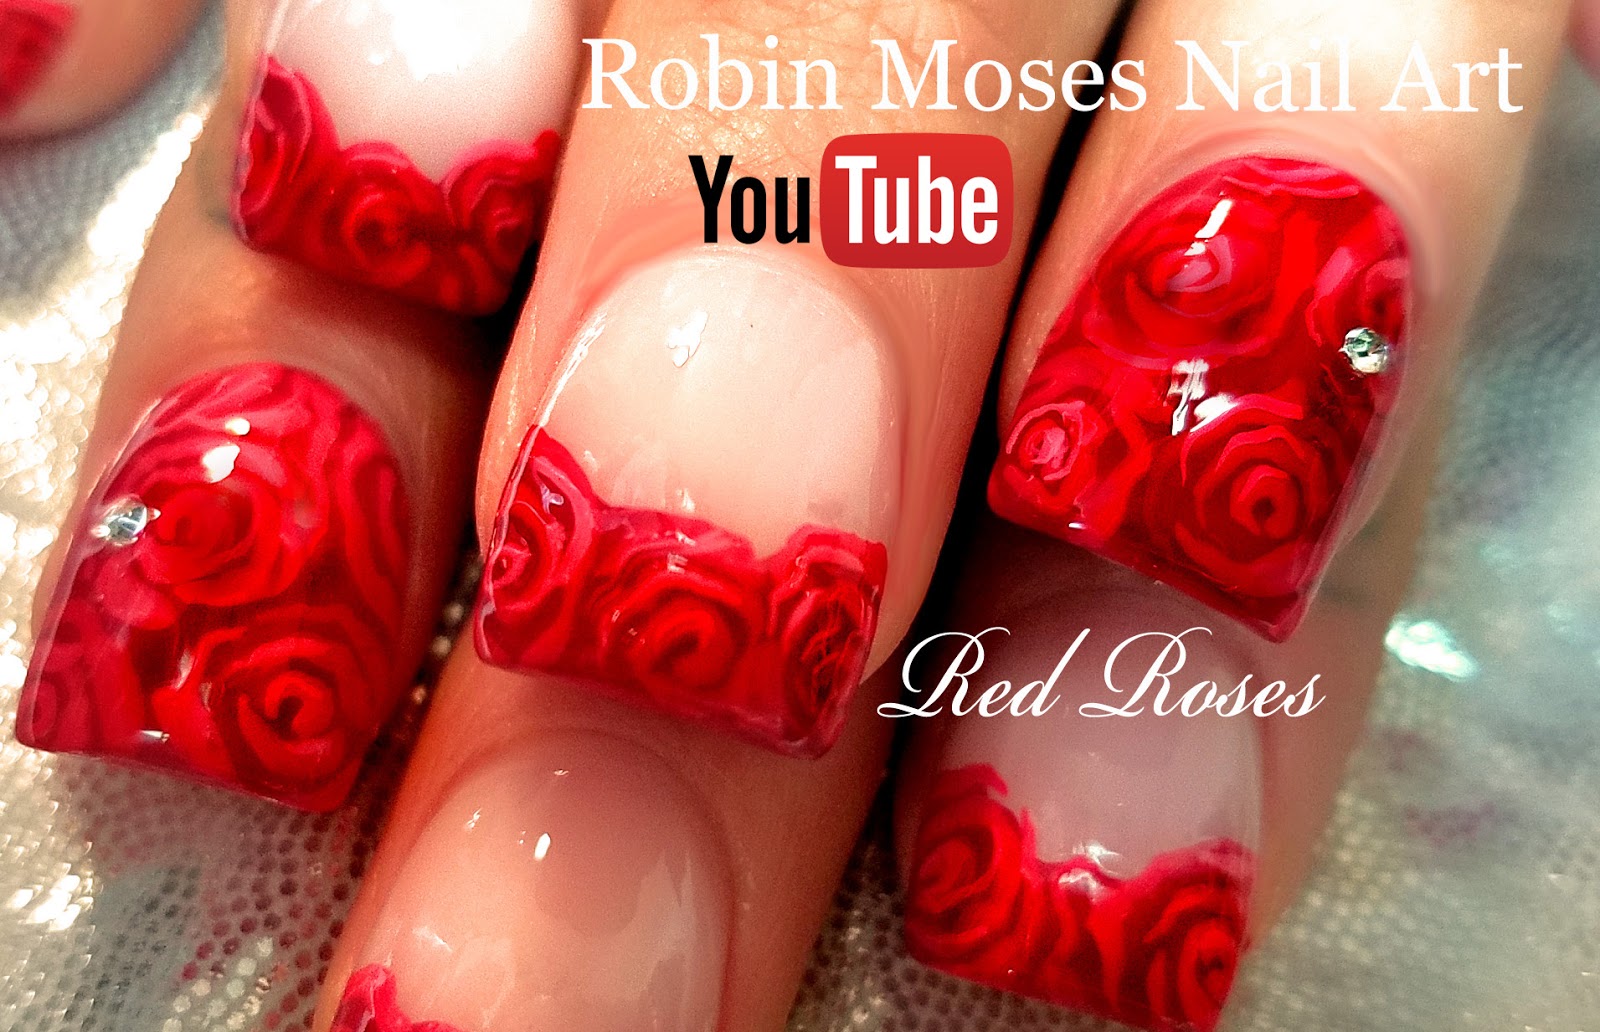 9. "Nail Art Tutorial: Create a Geometric Design with Each Nail a Different Color" - wide 8